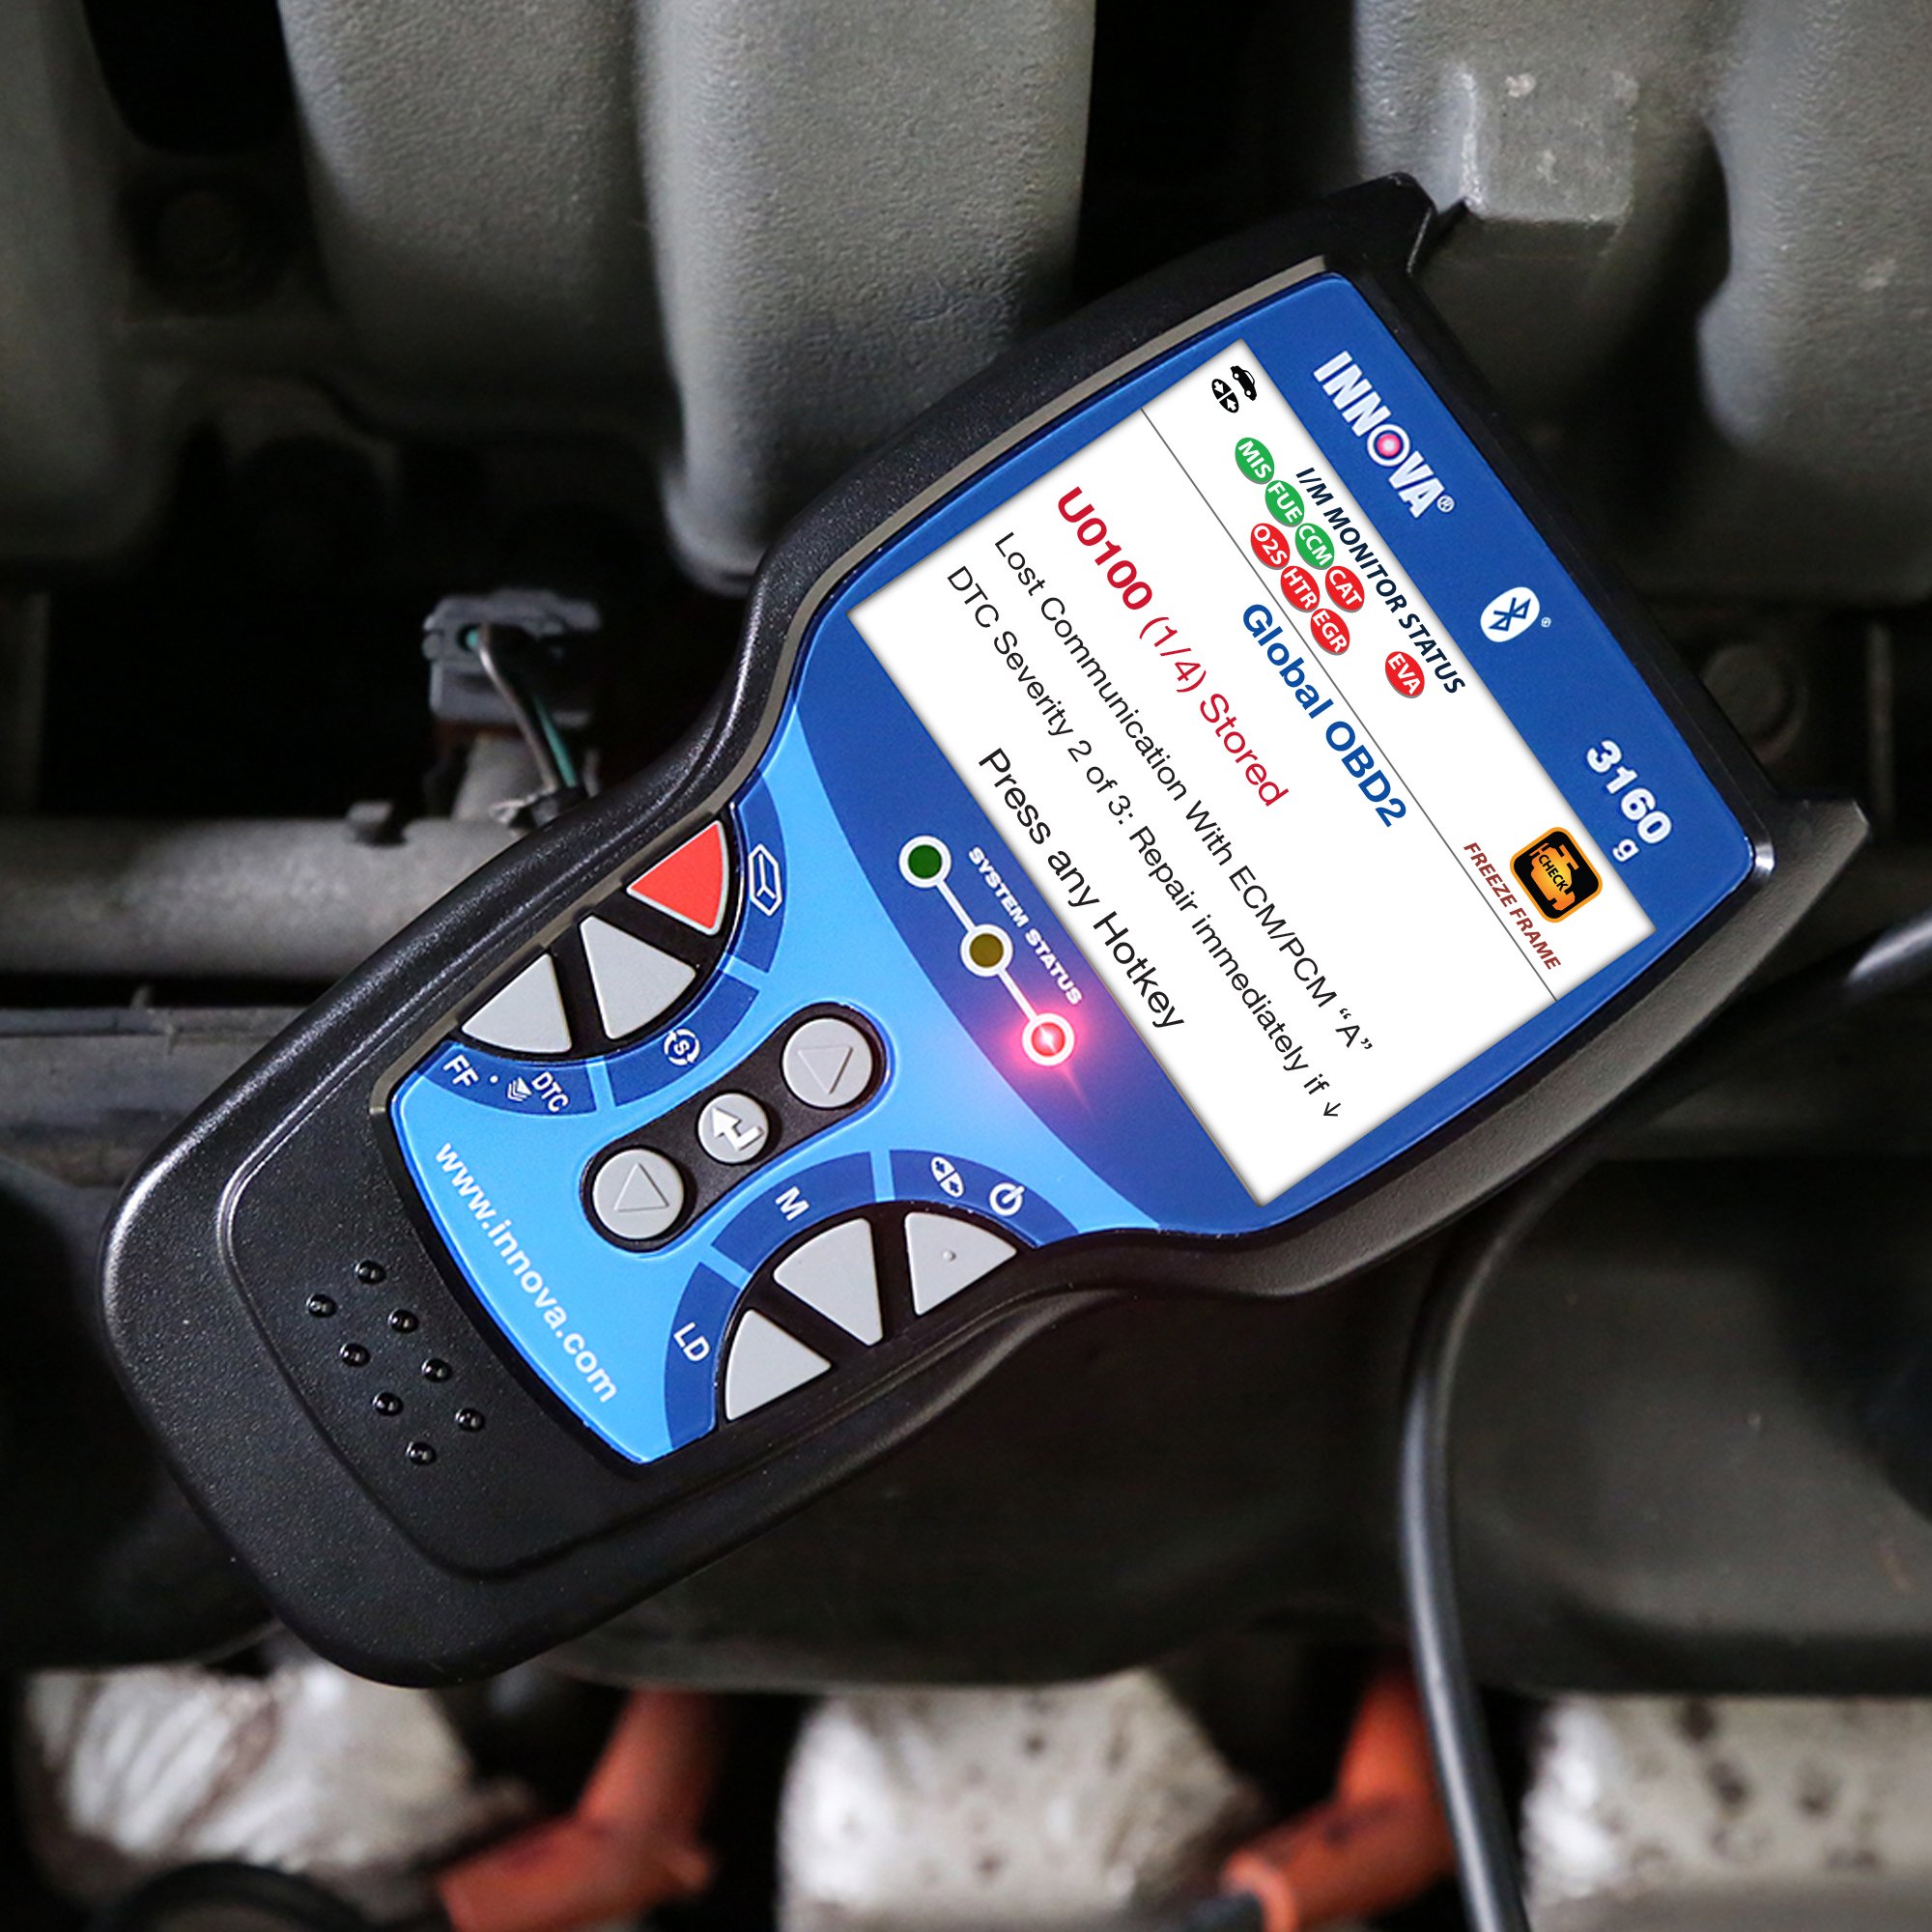 best obd2 scanner
The best 